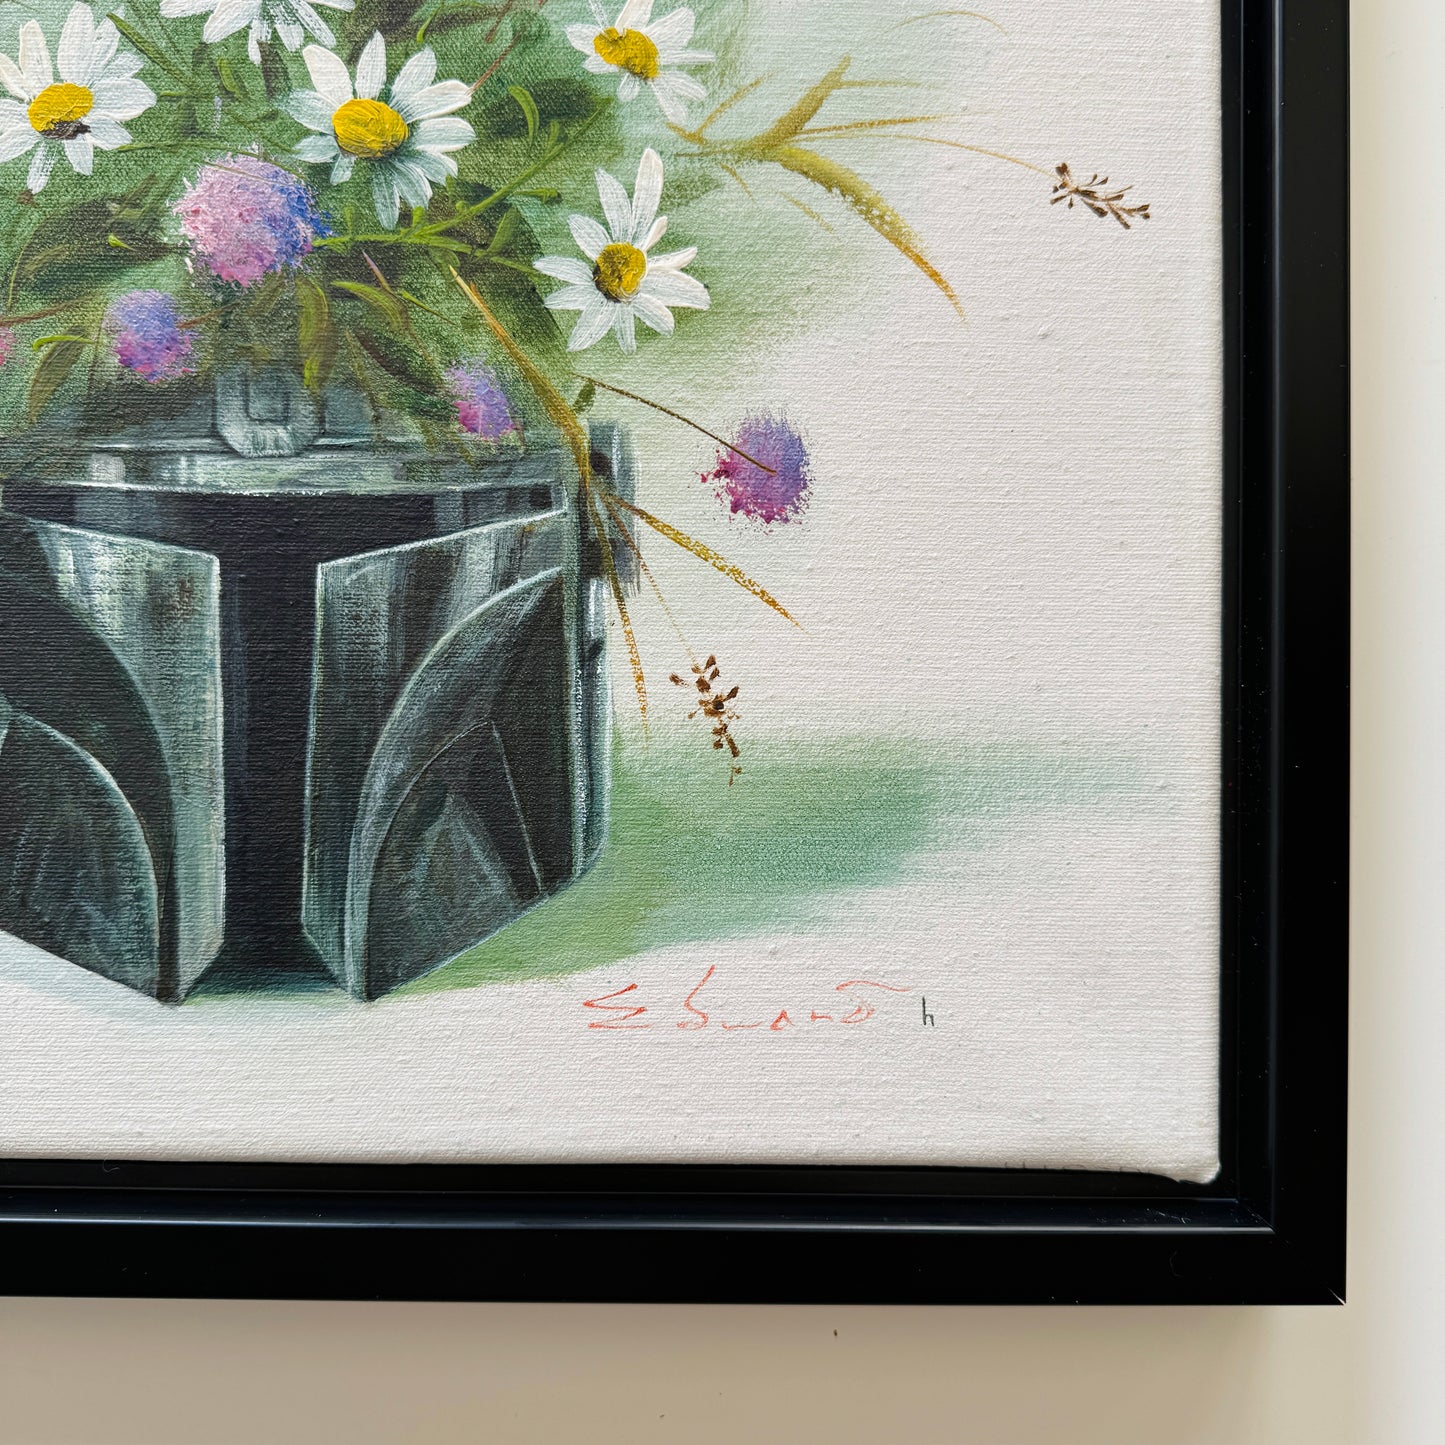 Dark Side Floral : The Dandalorian, upcycled vintage painting